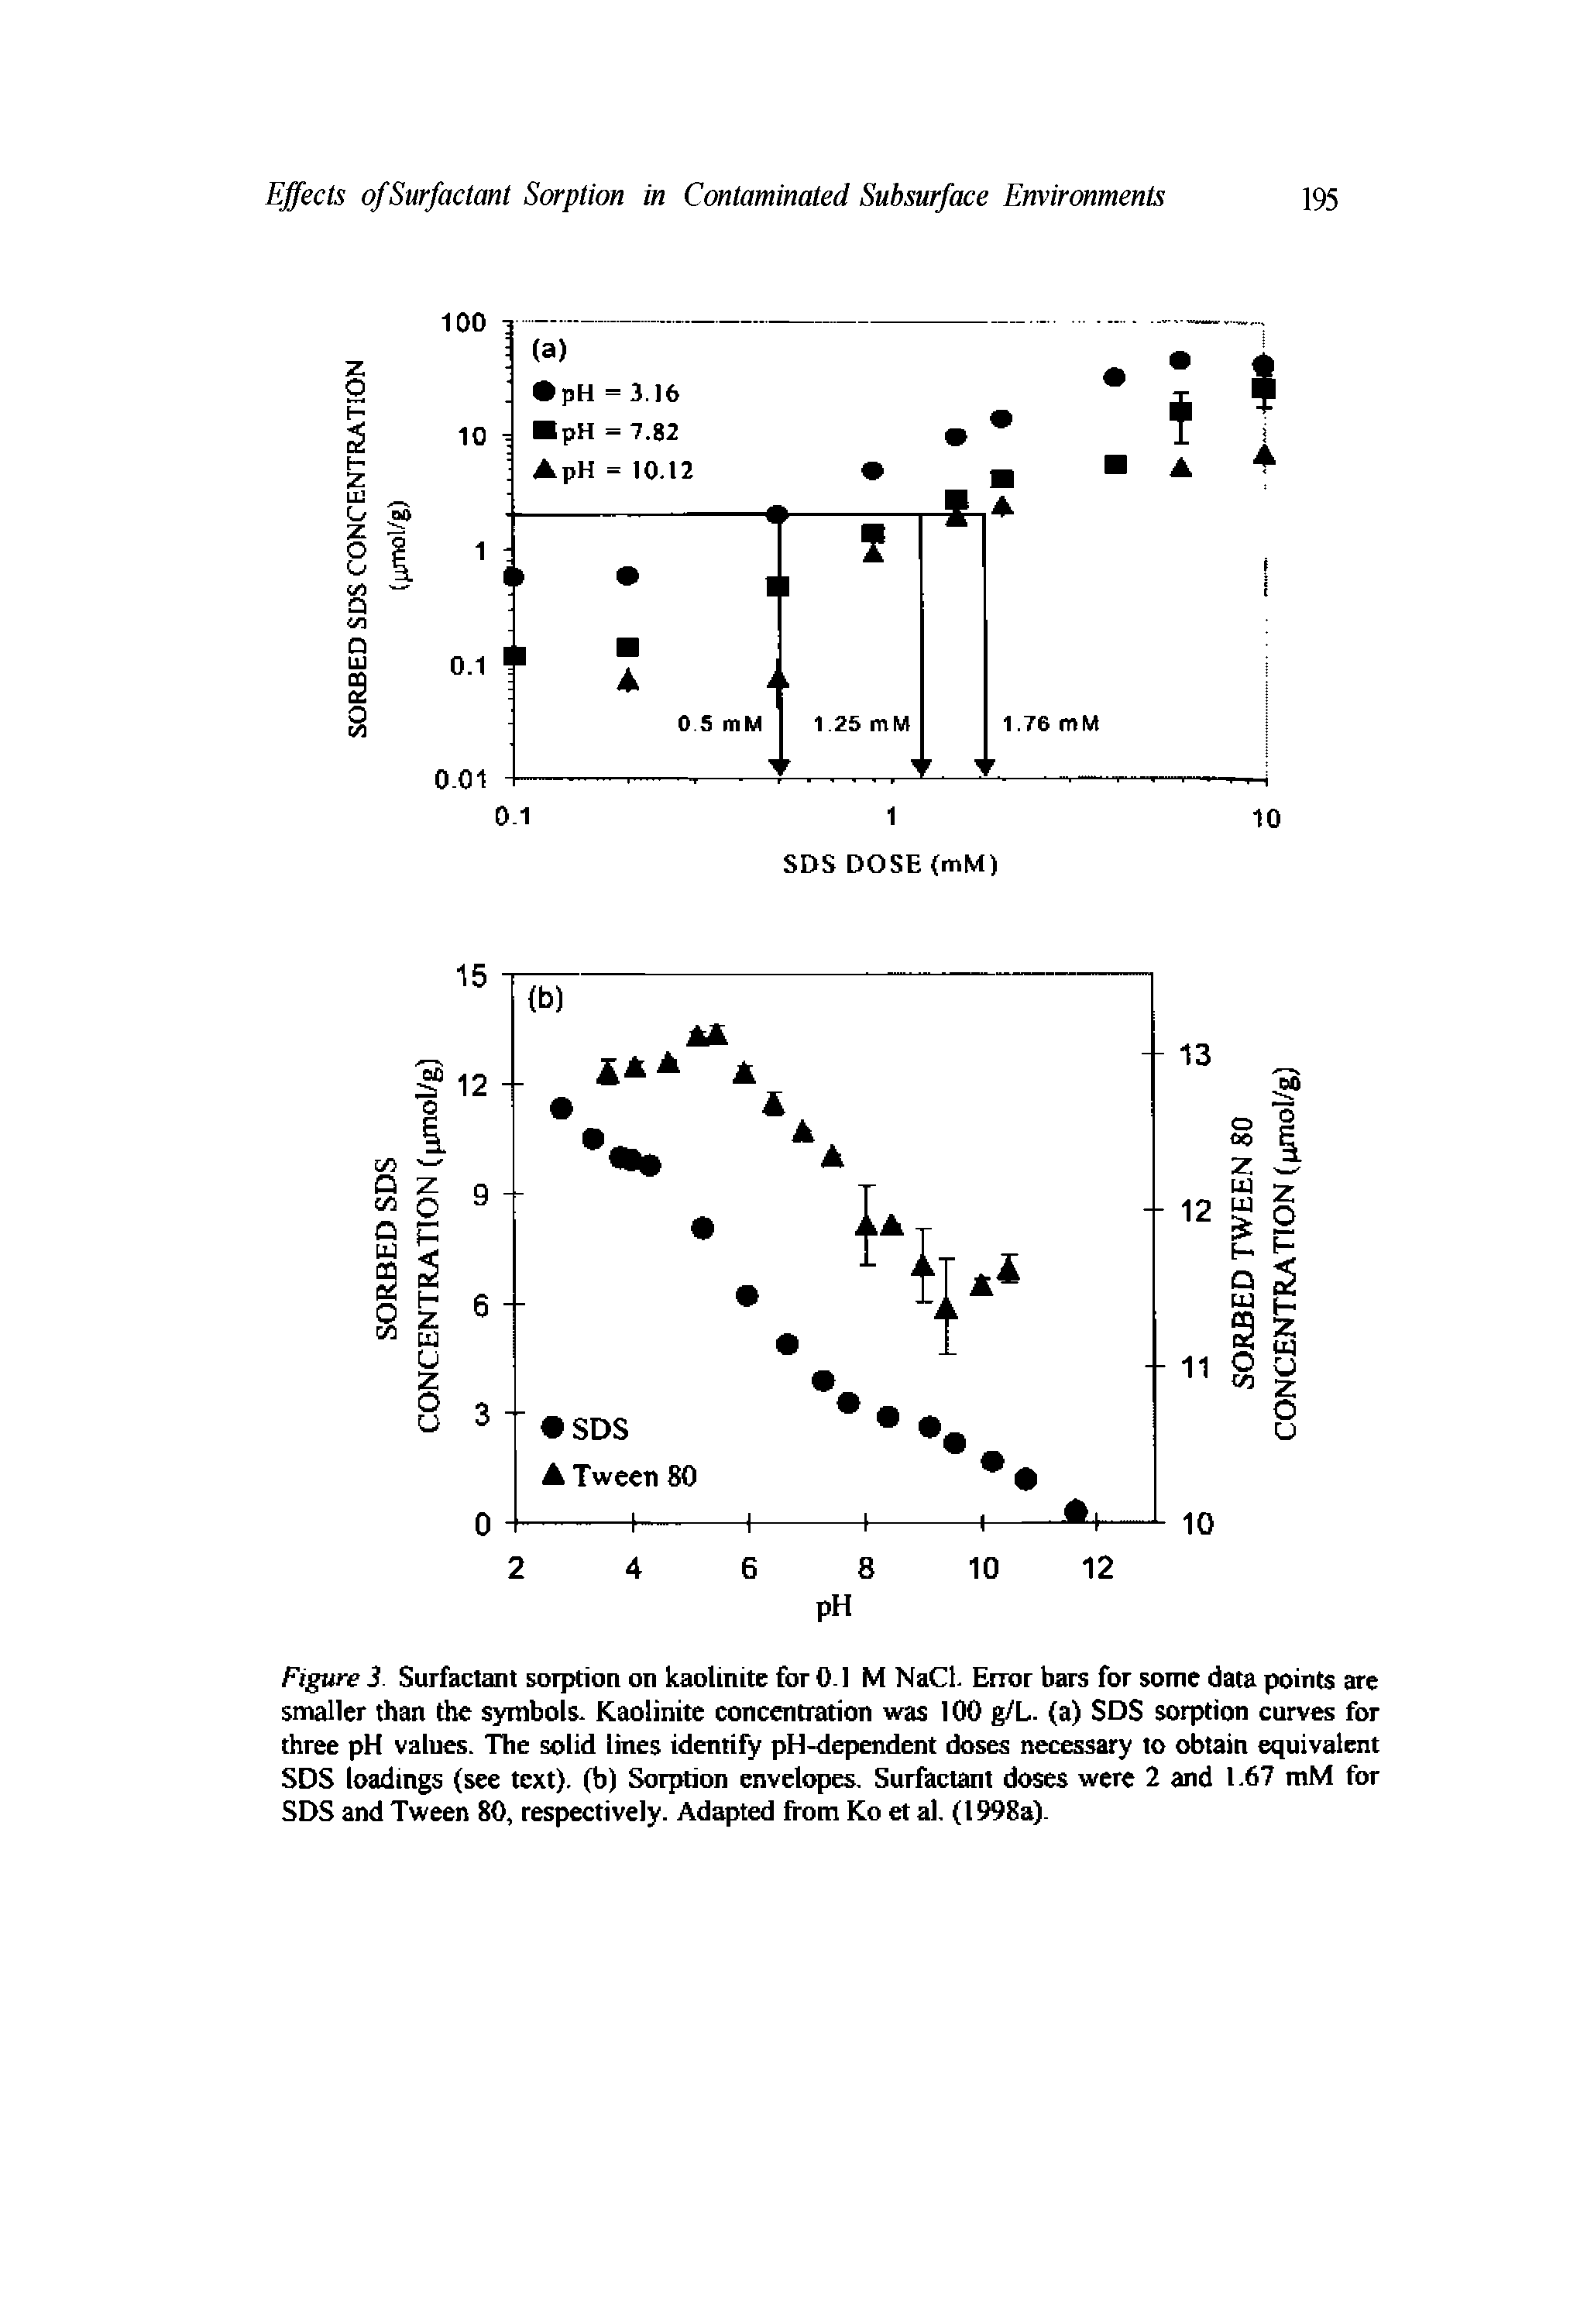 Figure 3. Surfactant sorption on kaolinite for 0.1 M NaCl. Error bars for some data points are smaller than the symbols. Kaolinite concentration was 100 g/L. (a) SDS sorption curves for three pH values. The solid lines identify pH-dependent doses necessary to obtain equivalent SDS loadings (see text), (b) Sorption envelopes. Surfactant doses were 2 and 1.67 mM for SDS and Tween 80, respectively. Adapted from Ko et al. (1998a).